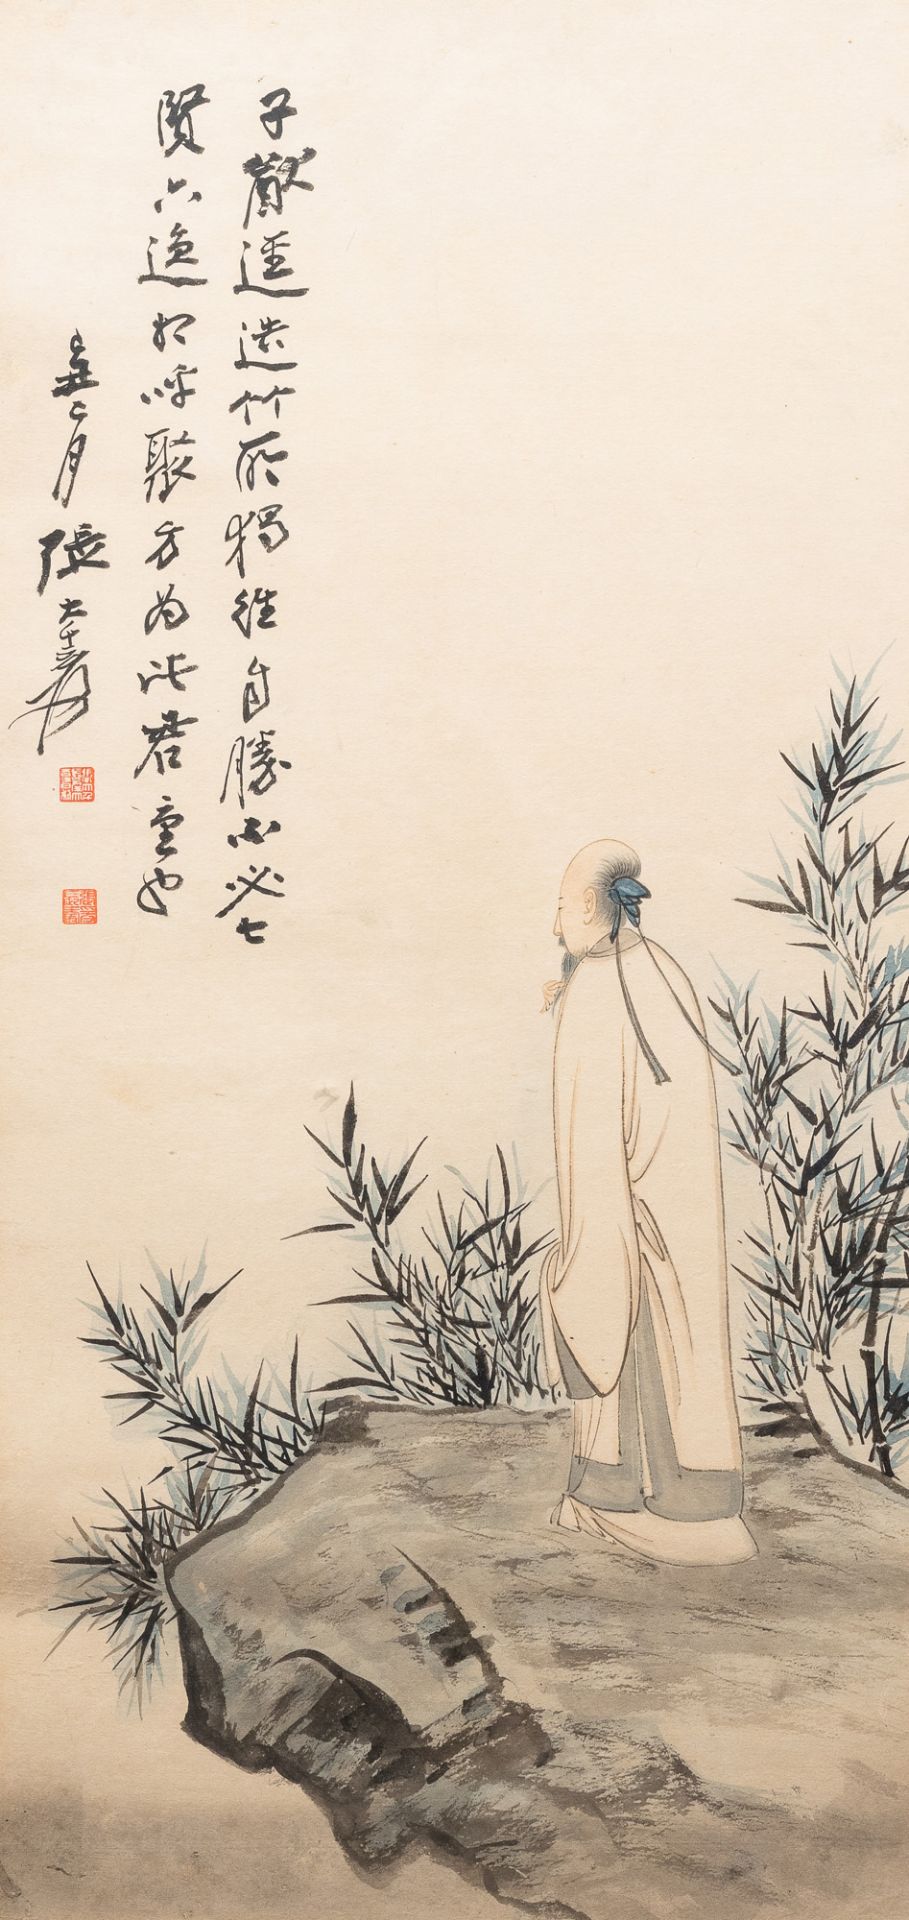 Zhang Daqian (1899-1983), ink and color on paper: 'Amidst the bamboo', dated 1949 - Image 3 of 37